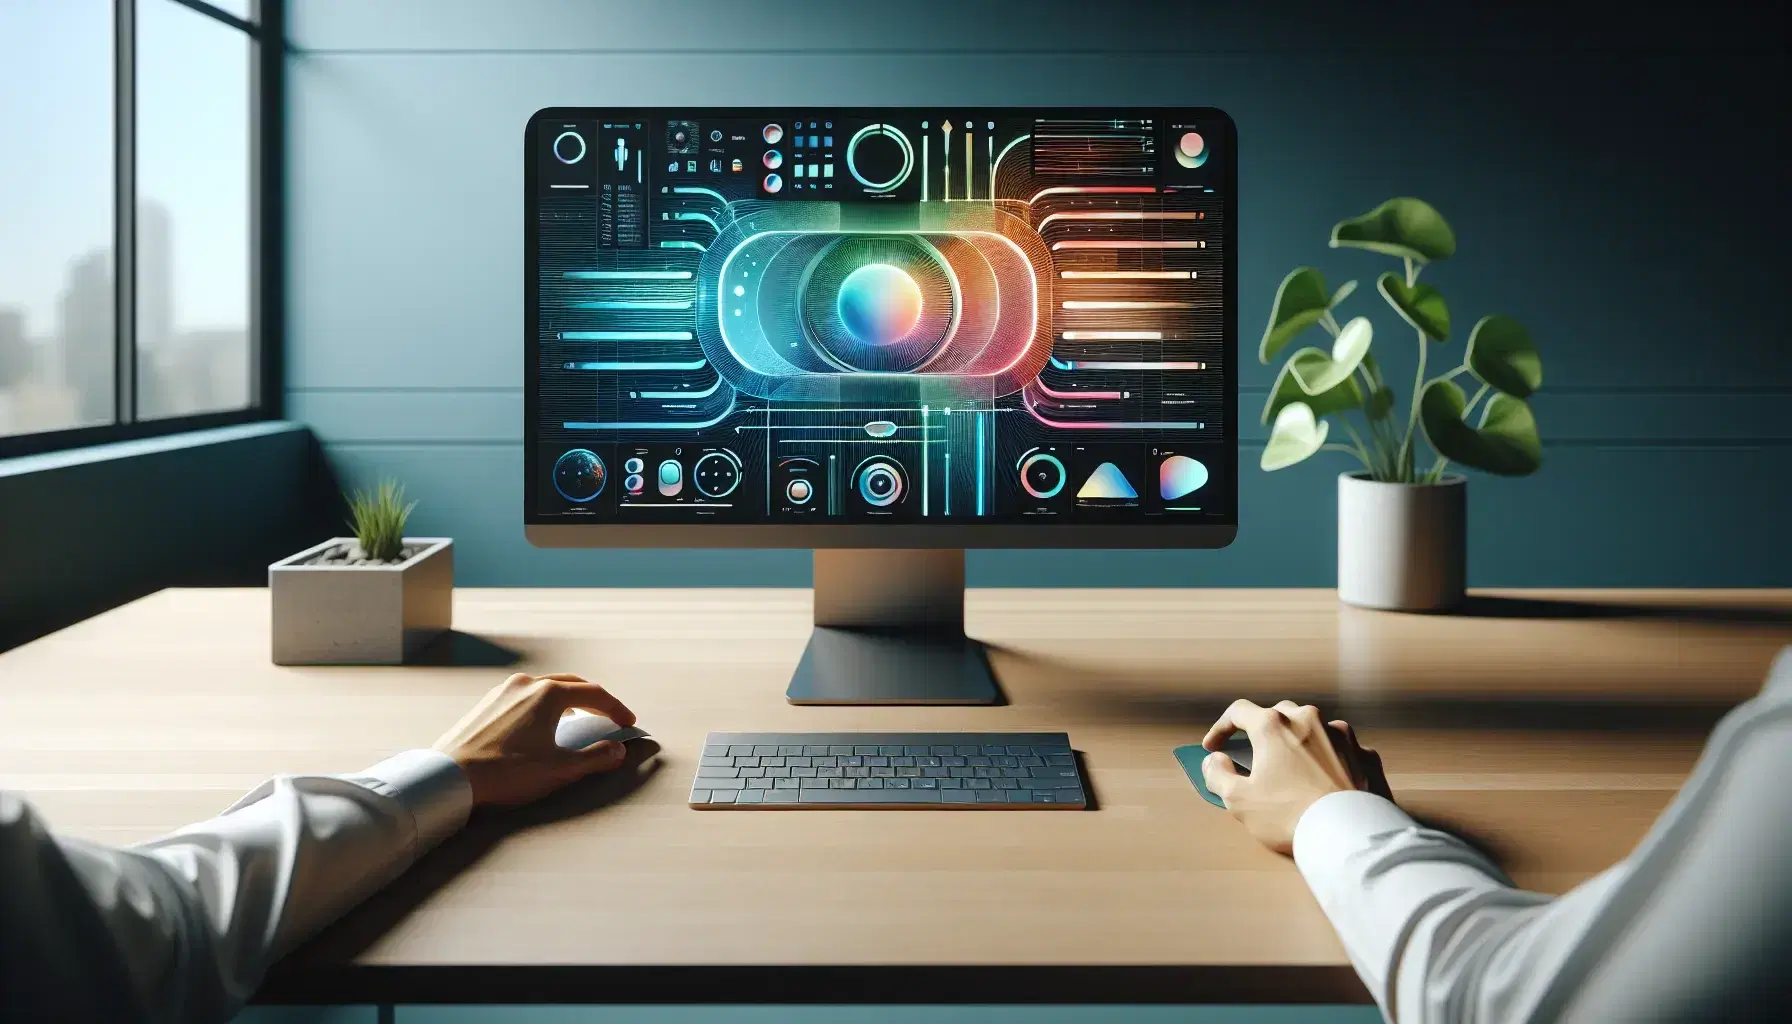 Modern minimalist office desk with a high-resolution monitor displaying a colorful abstract interface, wireless peripherals, and a potted plant.